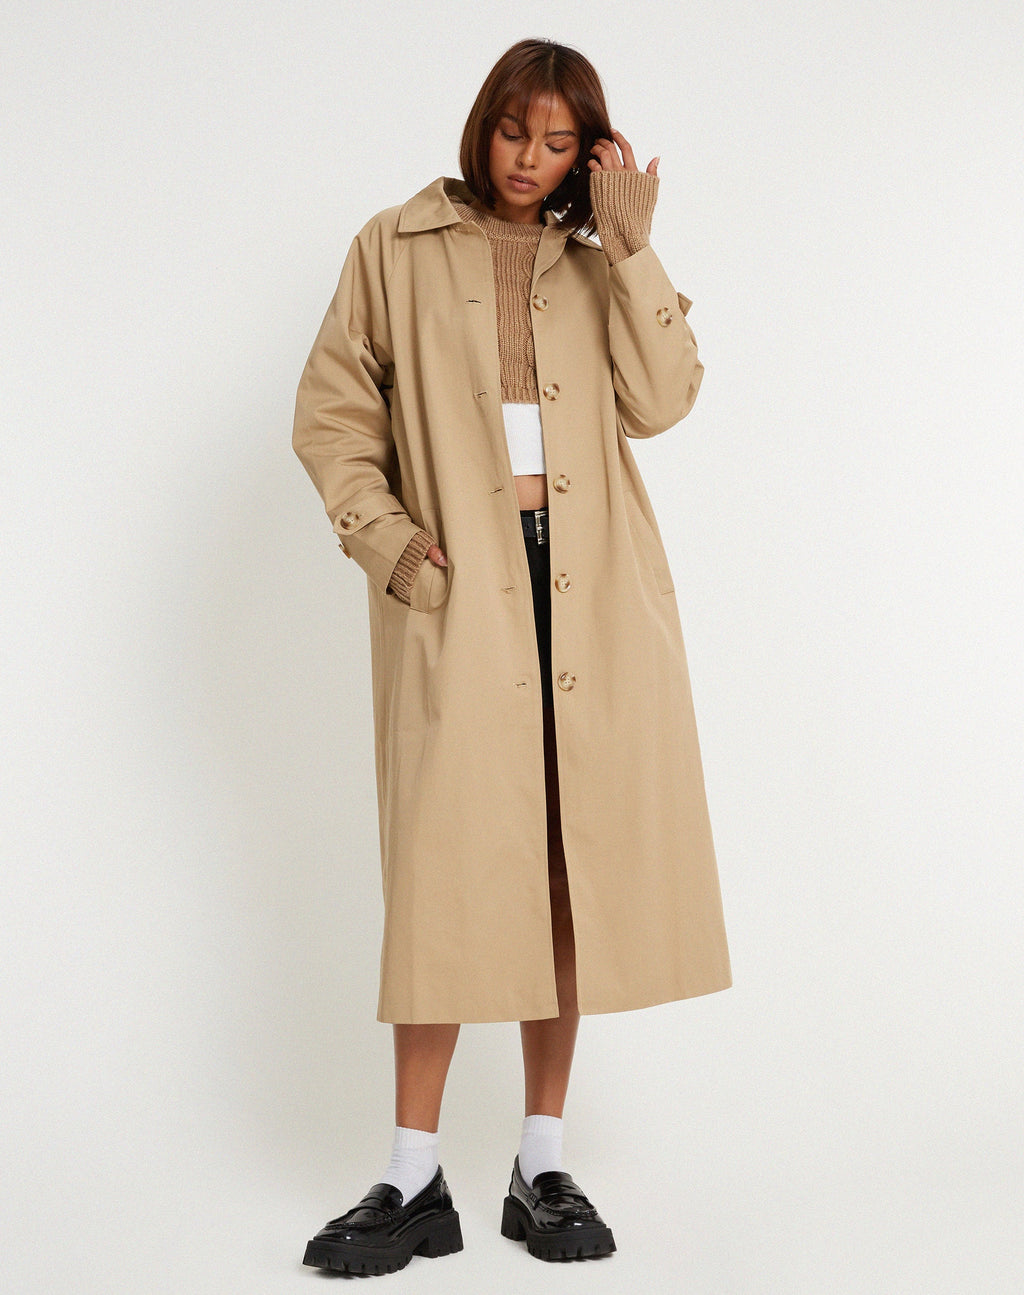 Assa Trench Coat in Tan with Stripe Lining